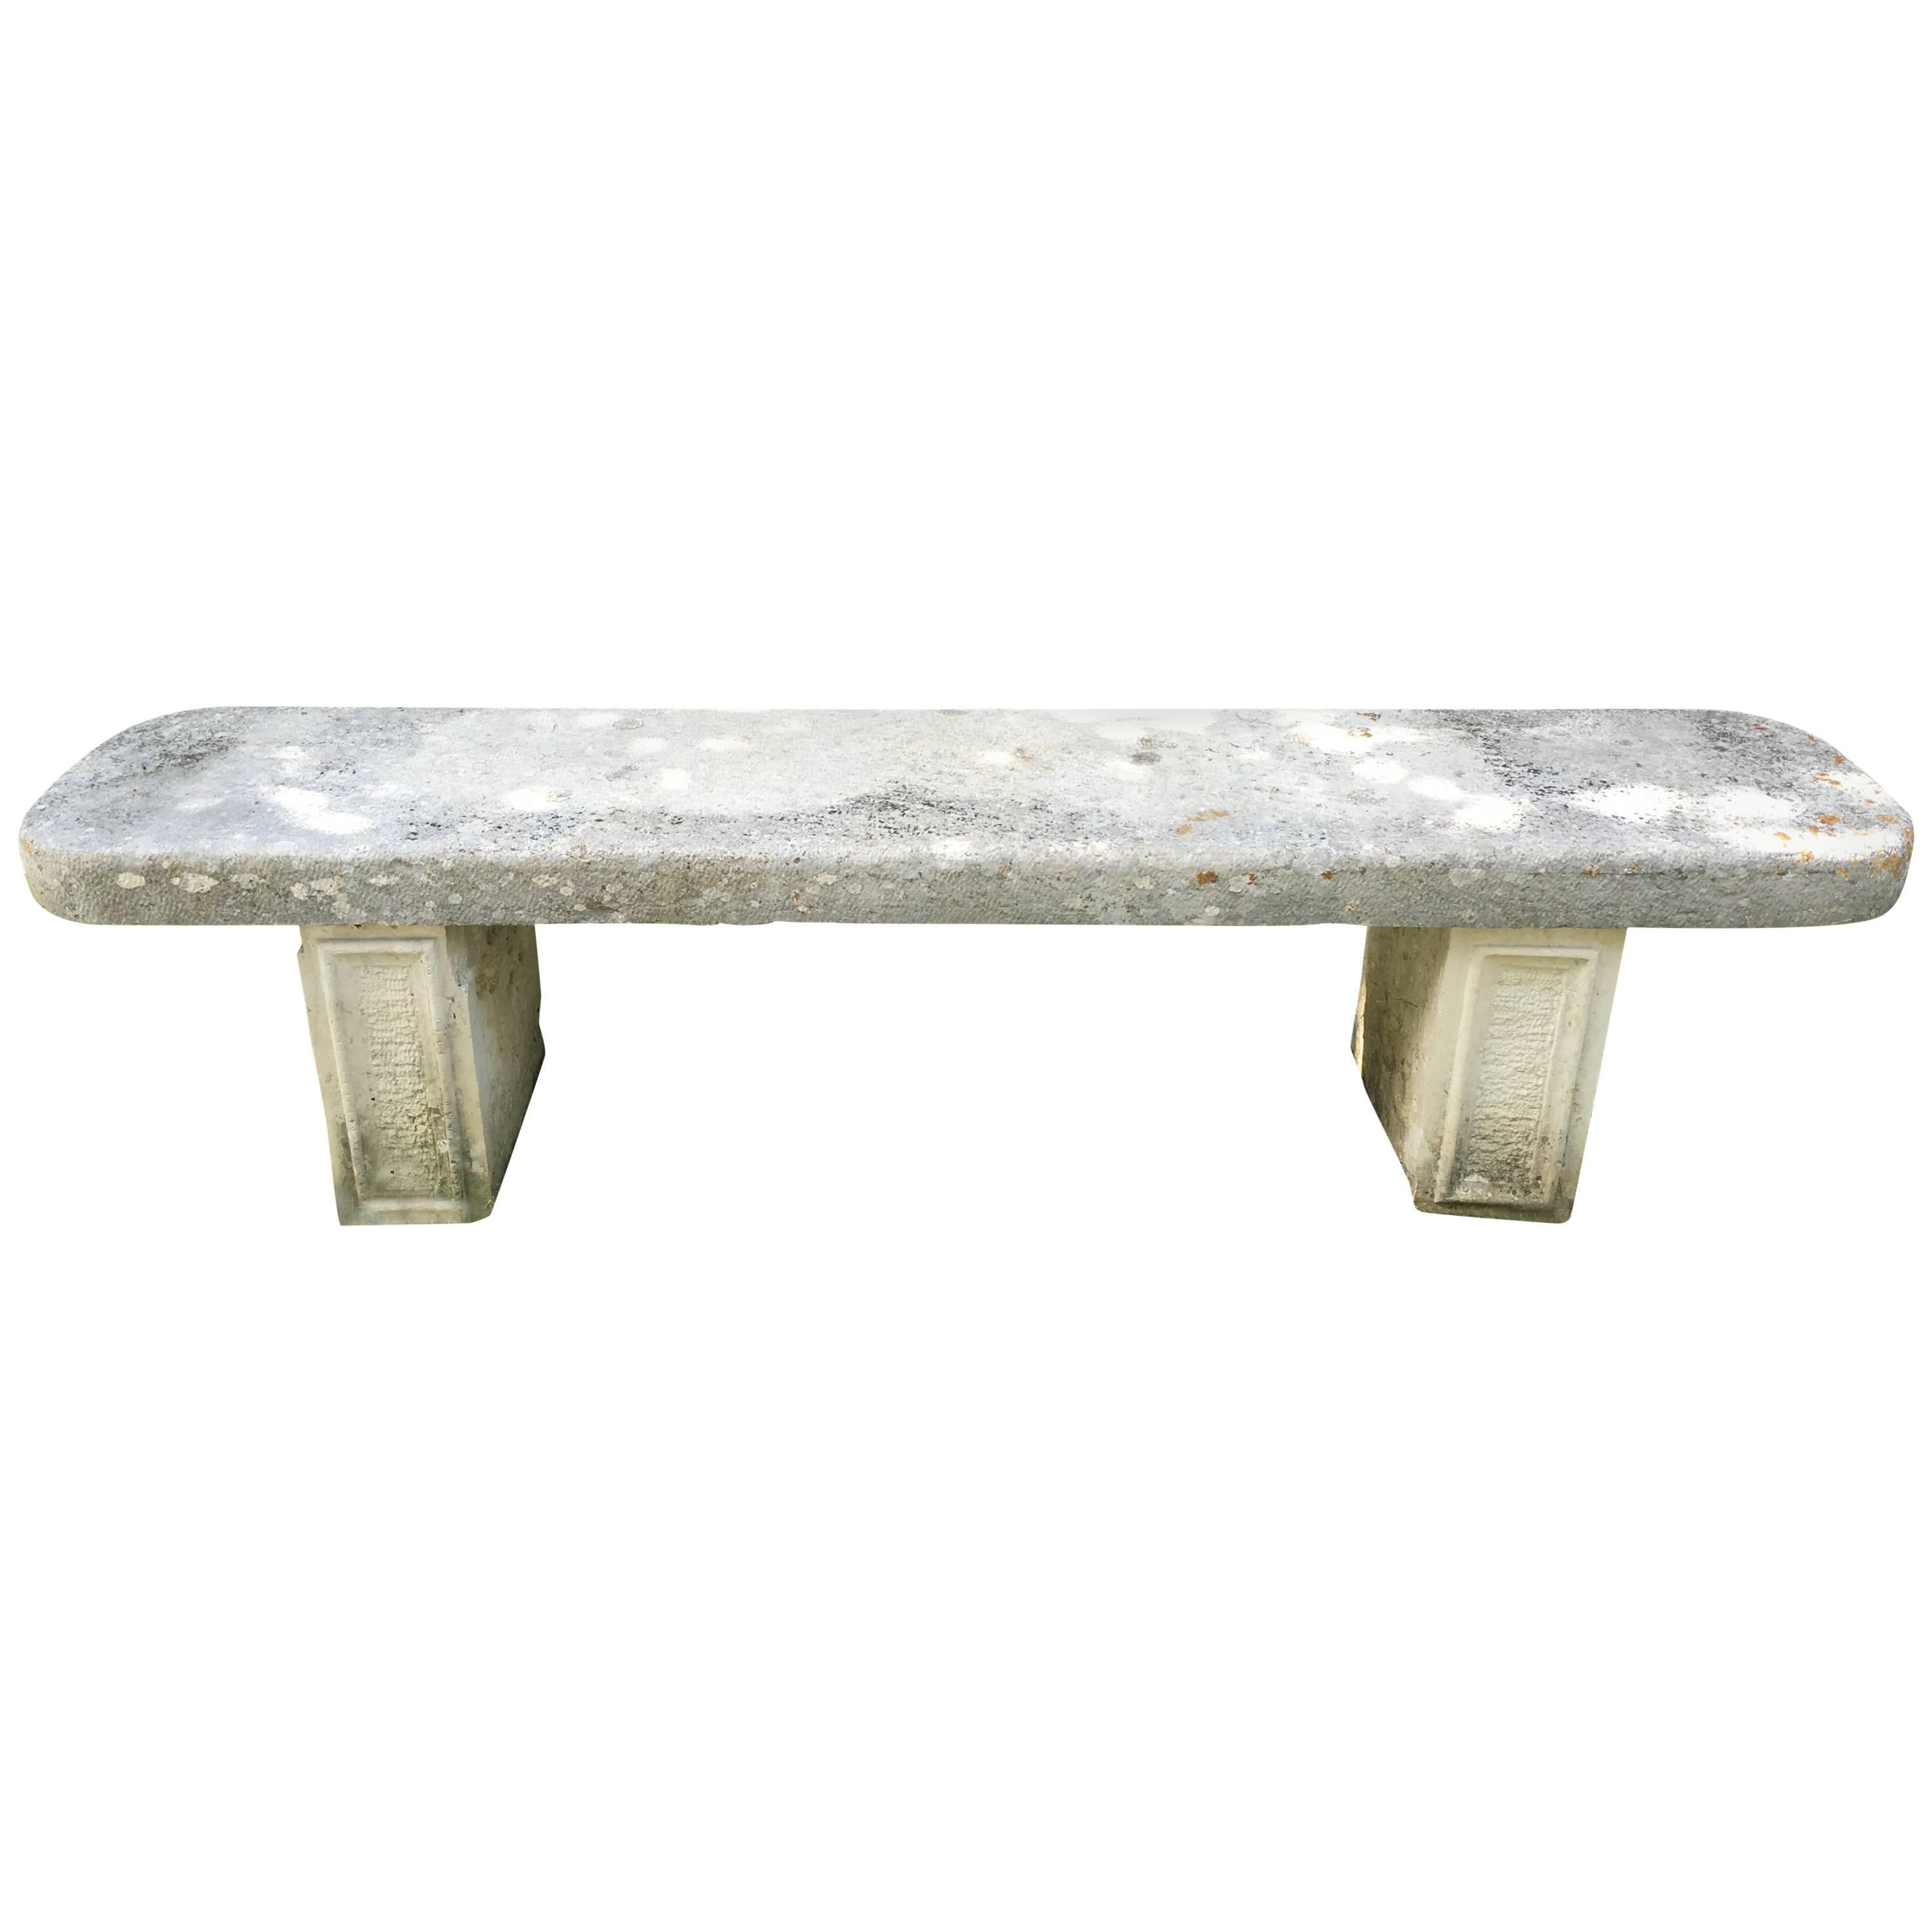 Large 19th Century French Limestone Bench with Rounded Edges For Sale